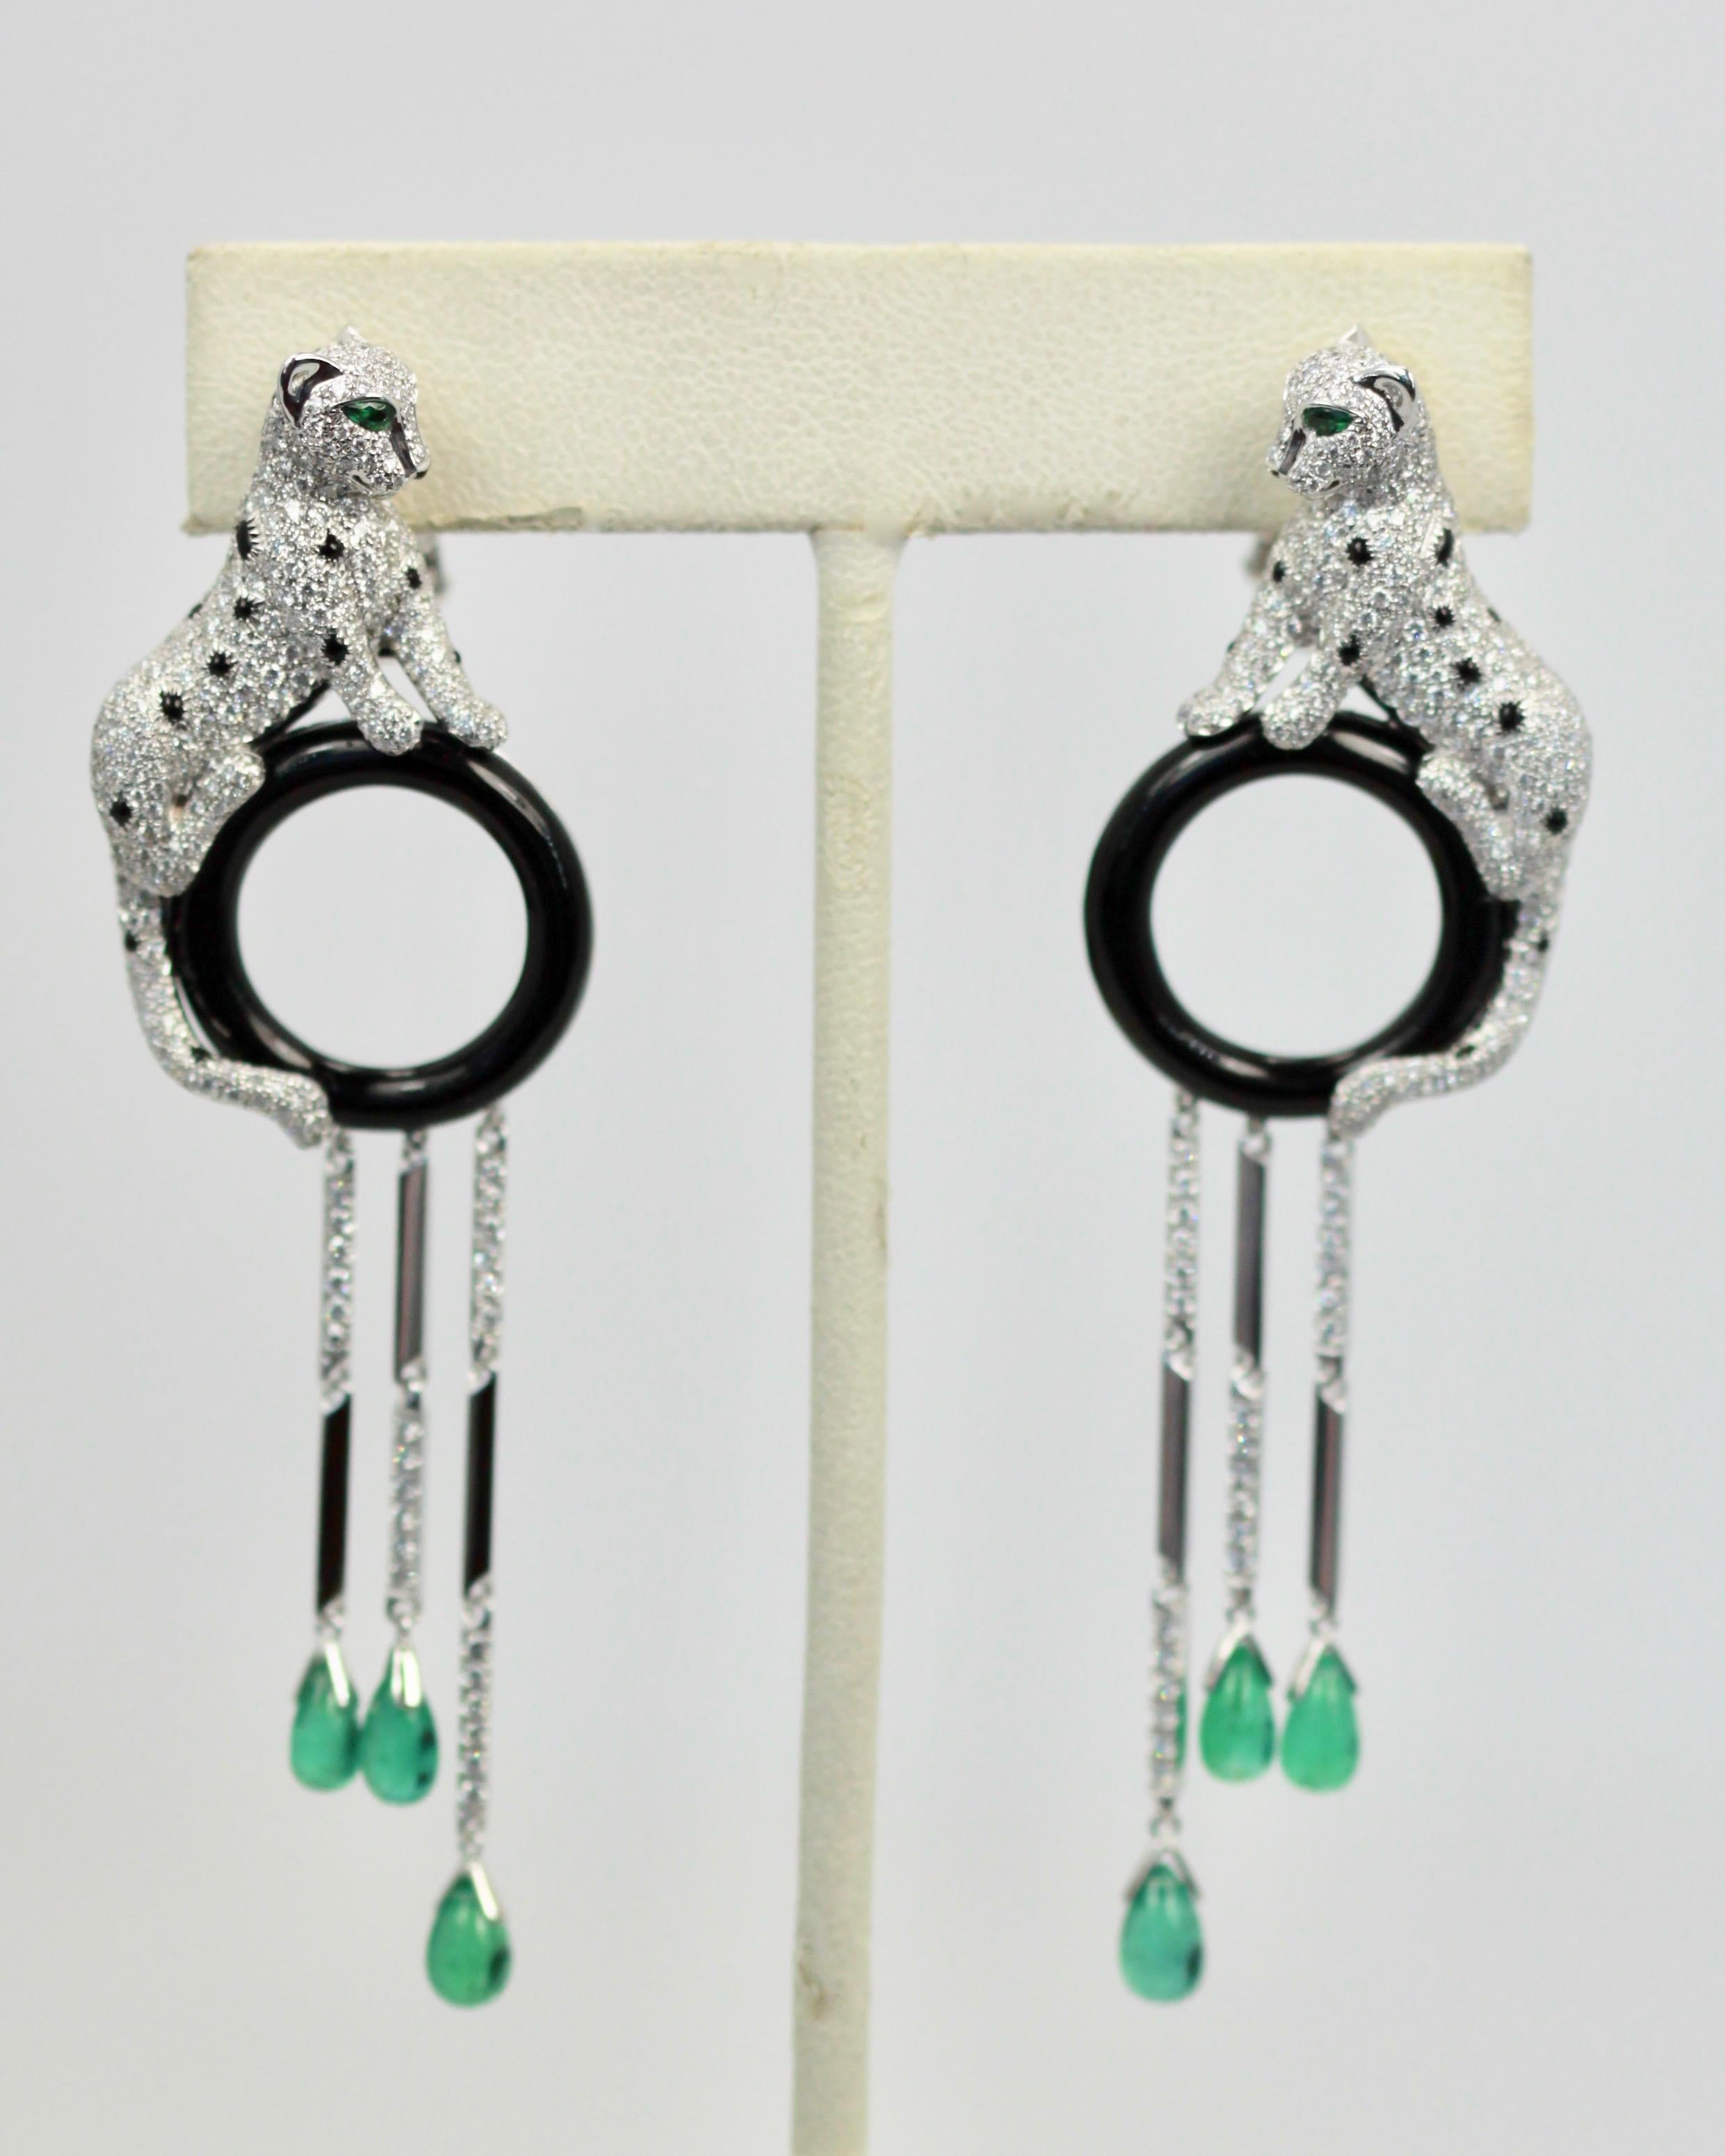 Women's Cartier Diamond Panthere Earrings with Onyx and Emeralds 18K